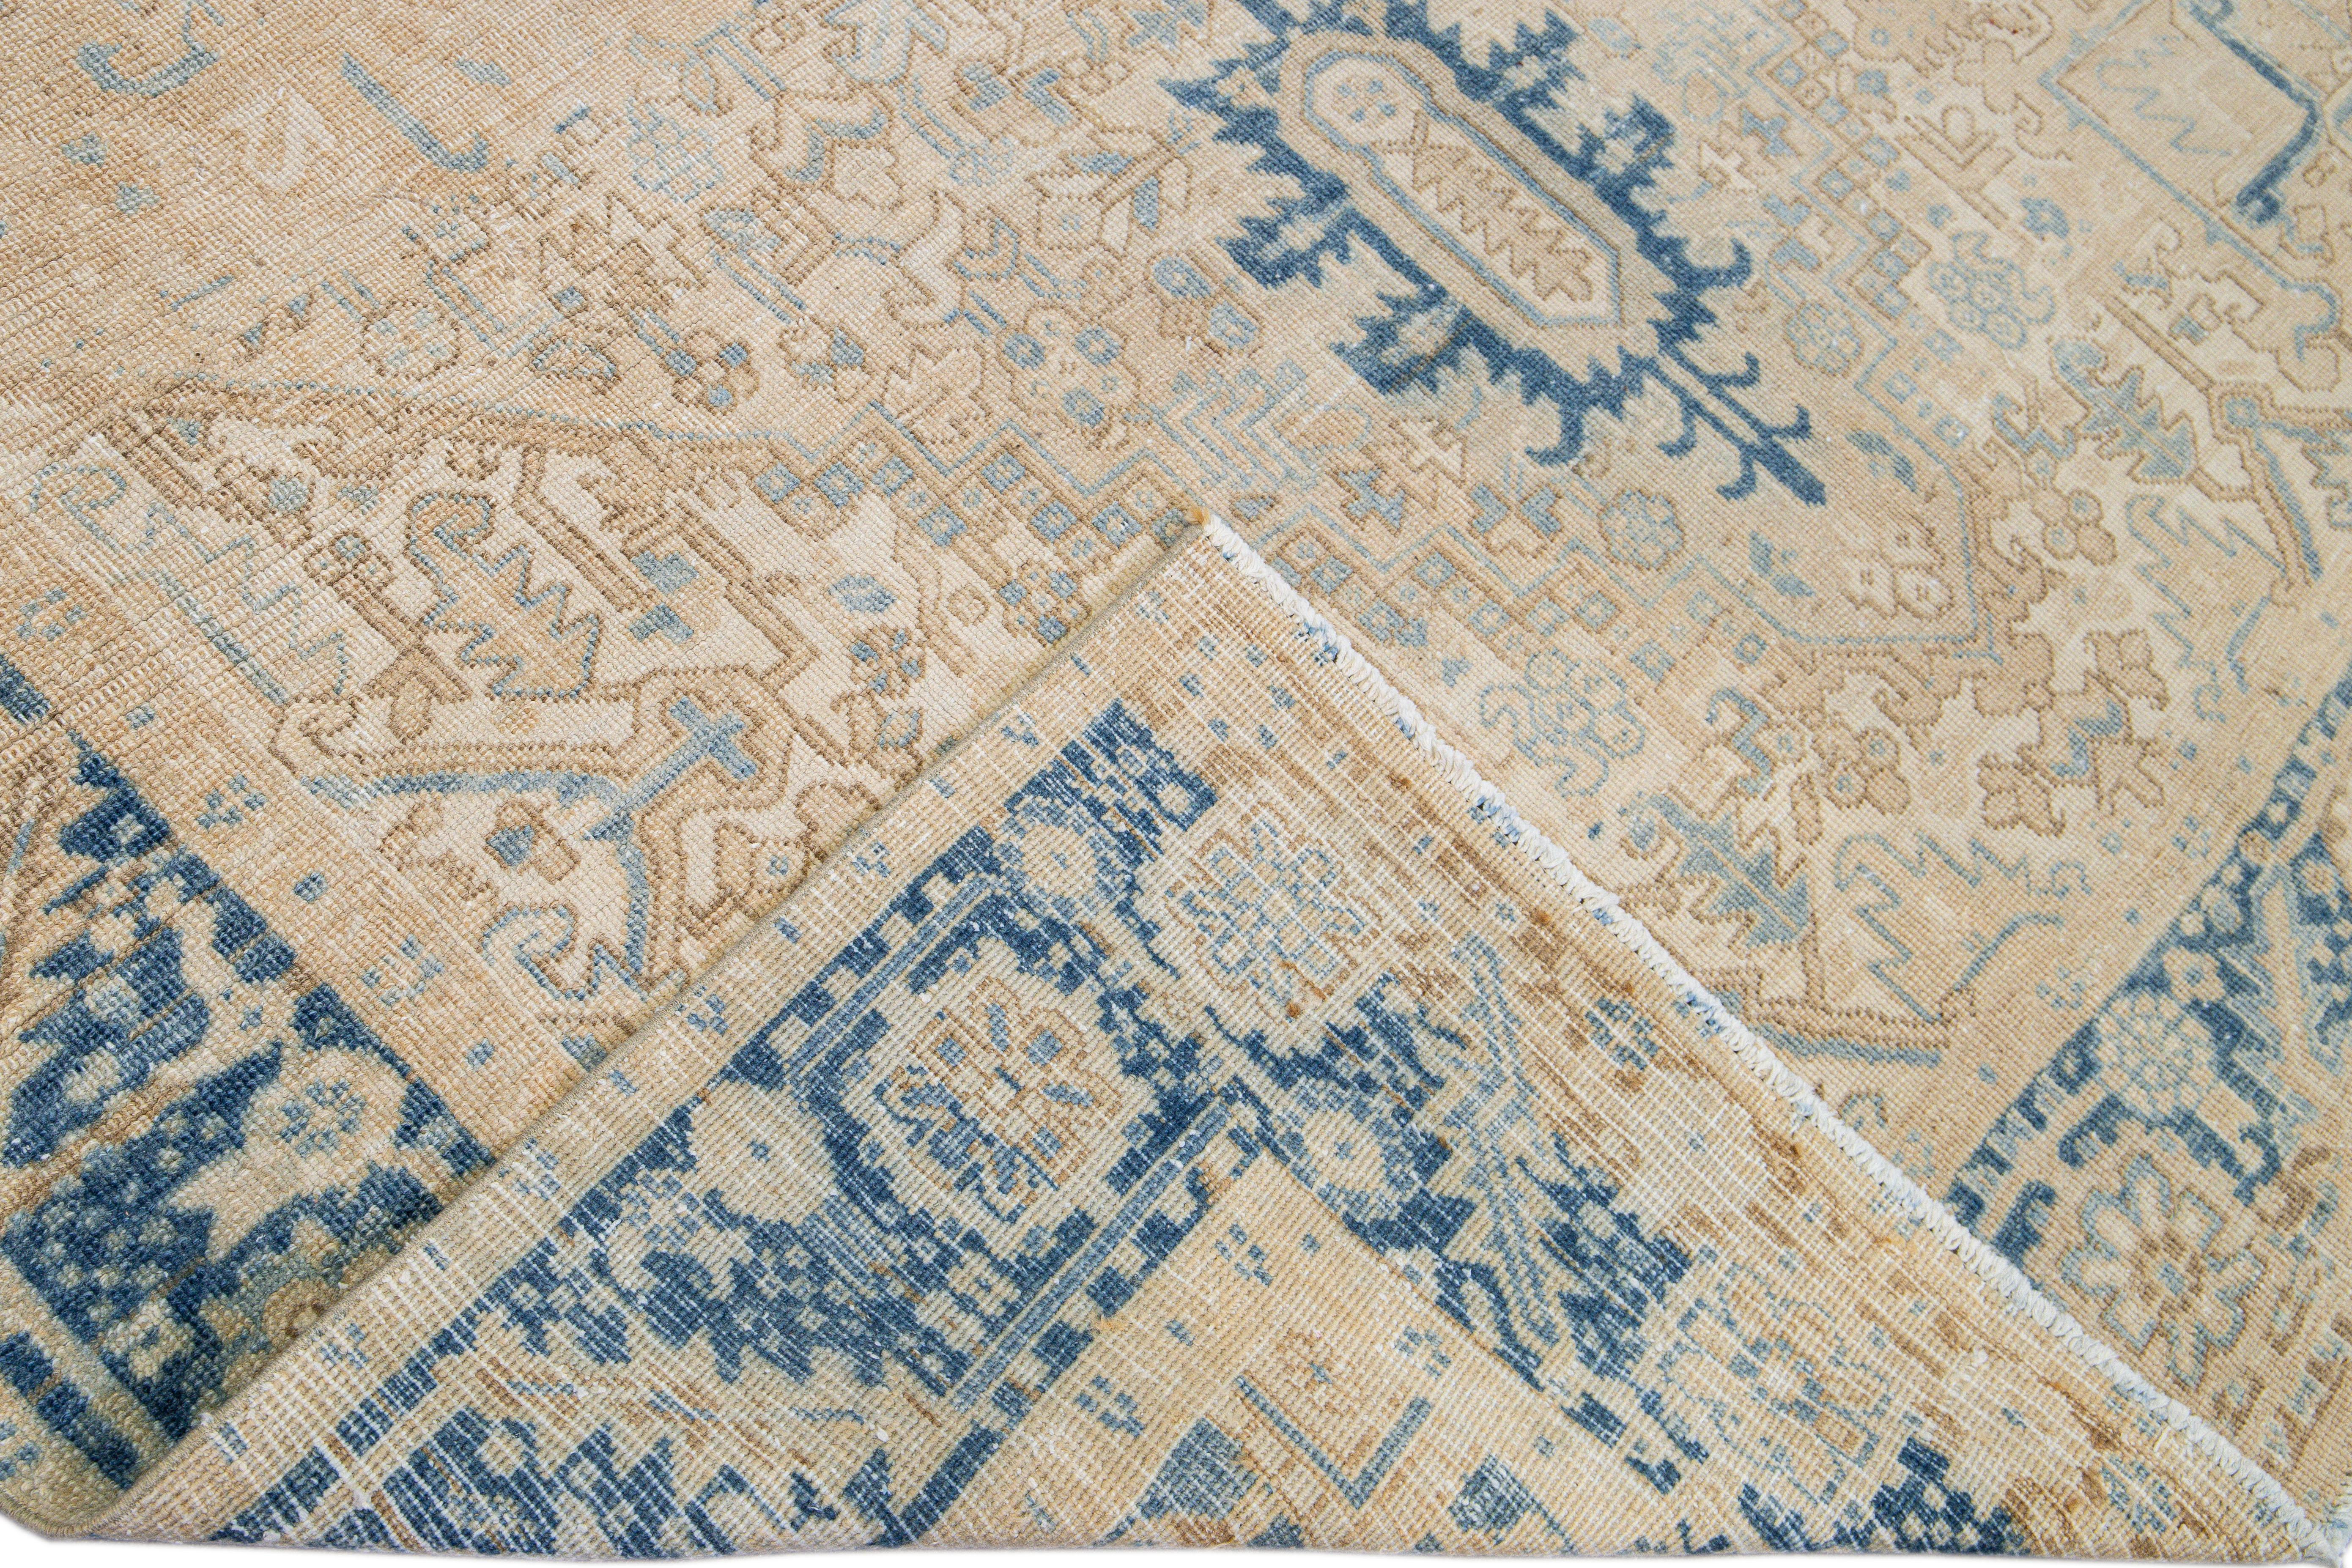 Beautiful antique Heriz hand-knotted wool rug with a beige field. This Persian rug has a blue frame and accents in a gorgeous all-over layout geometric medallion floral motif.

This rug measures: 7'8